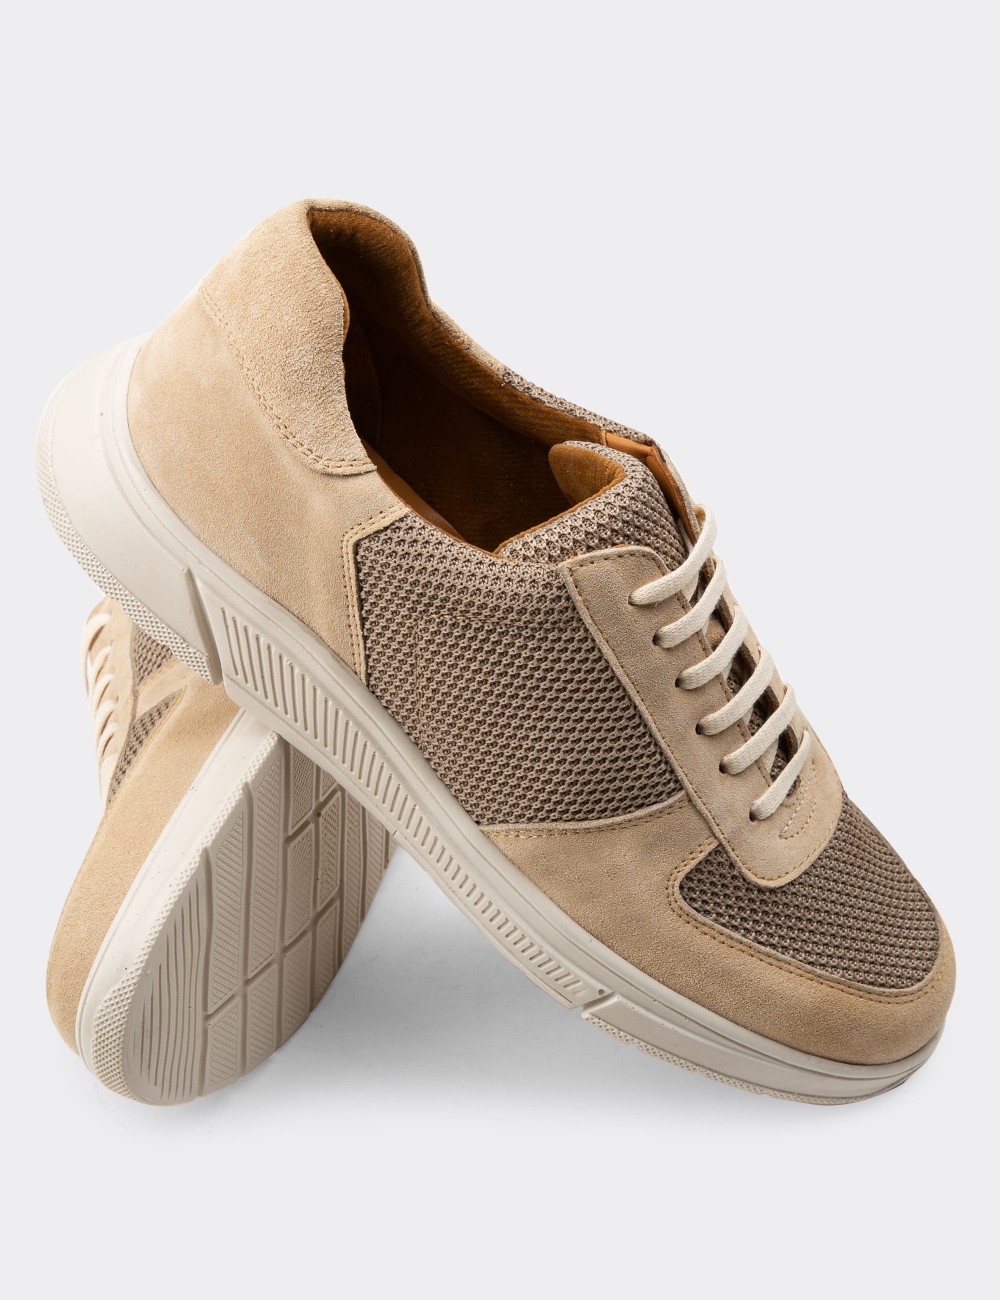 Beige Suede Leather Sneakers - 01860MBEJC01